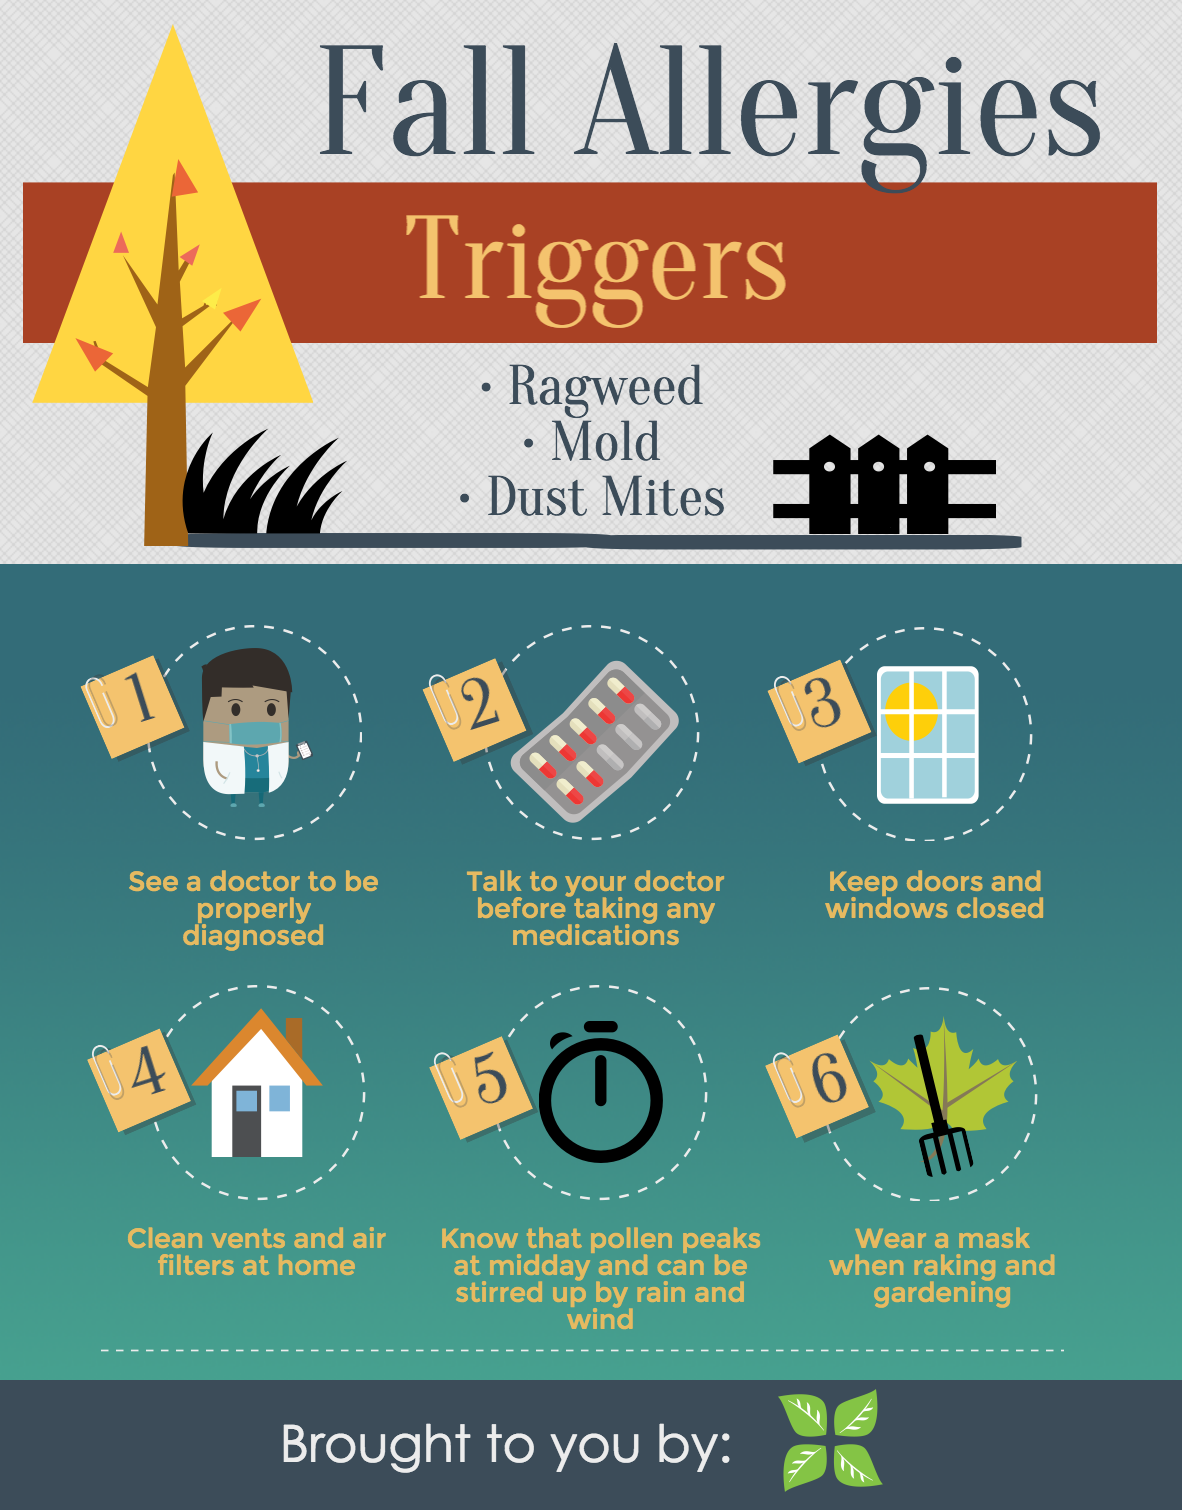 Fall allergies: triggers and tips